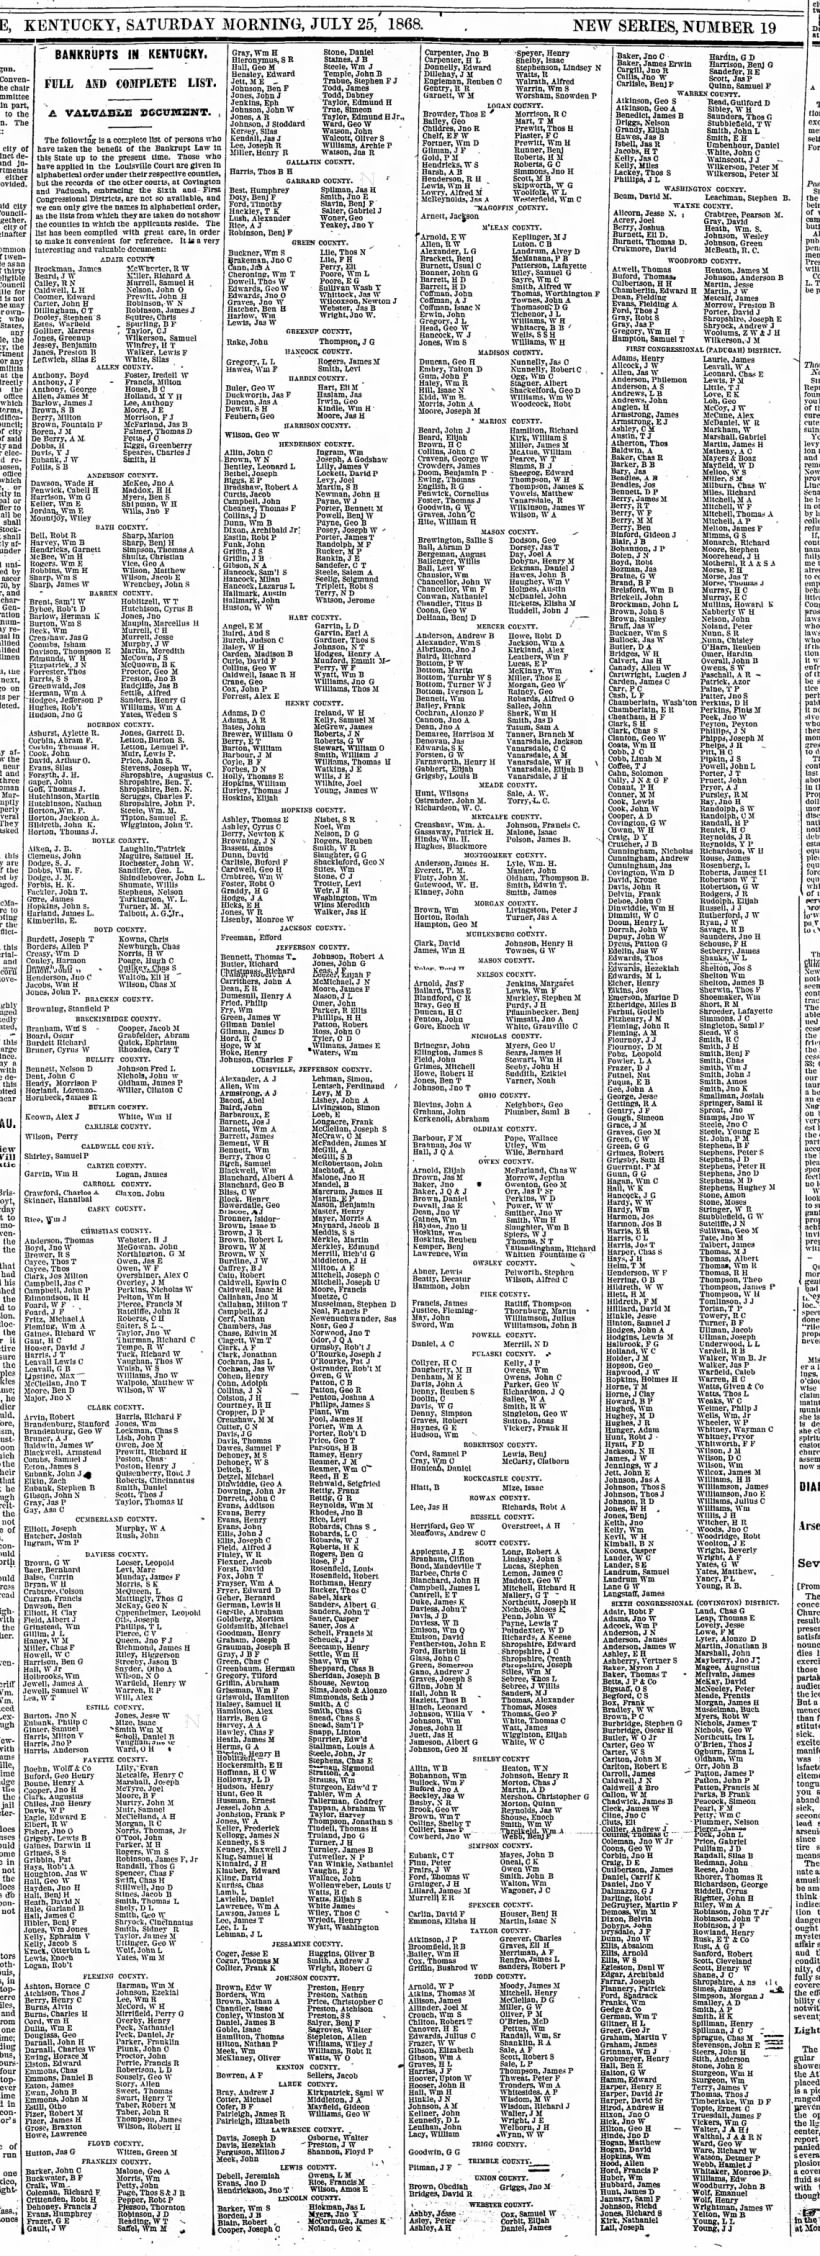 Full and complete list of "bankrupts in Kentucky" by county. McFadden